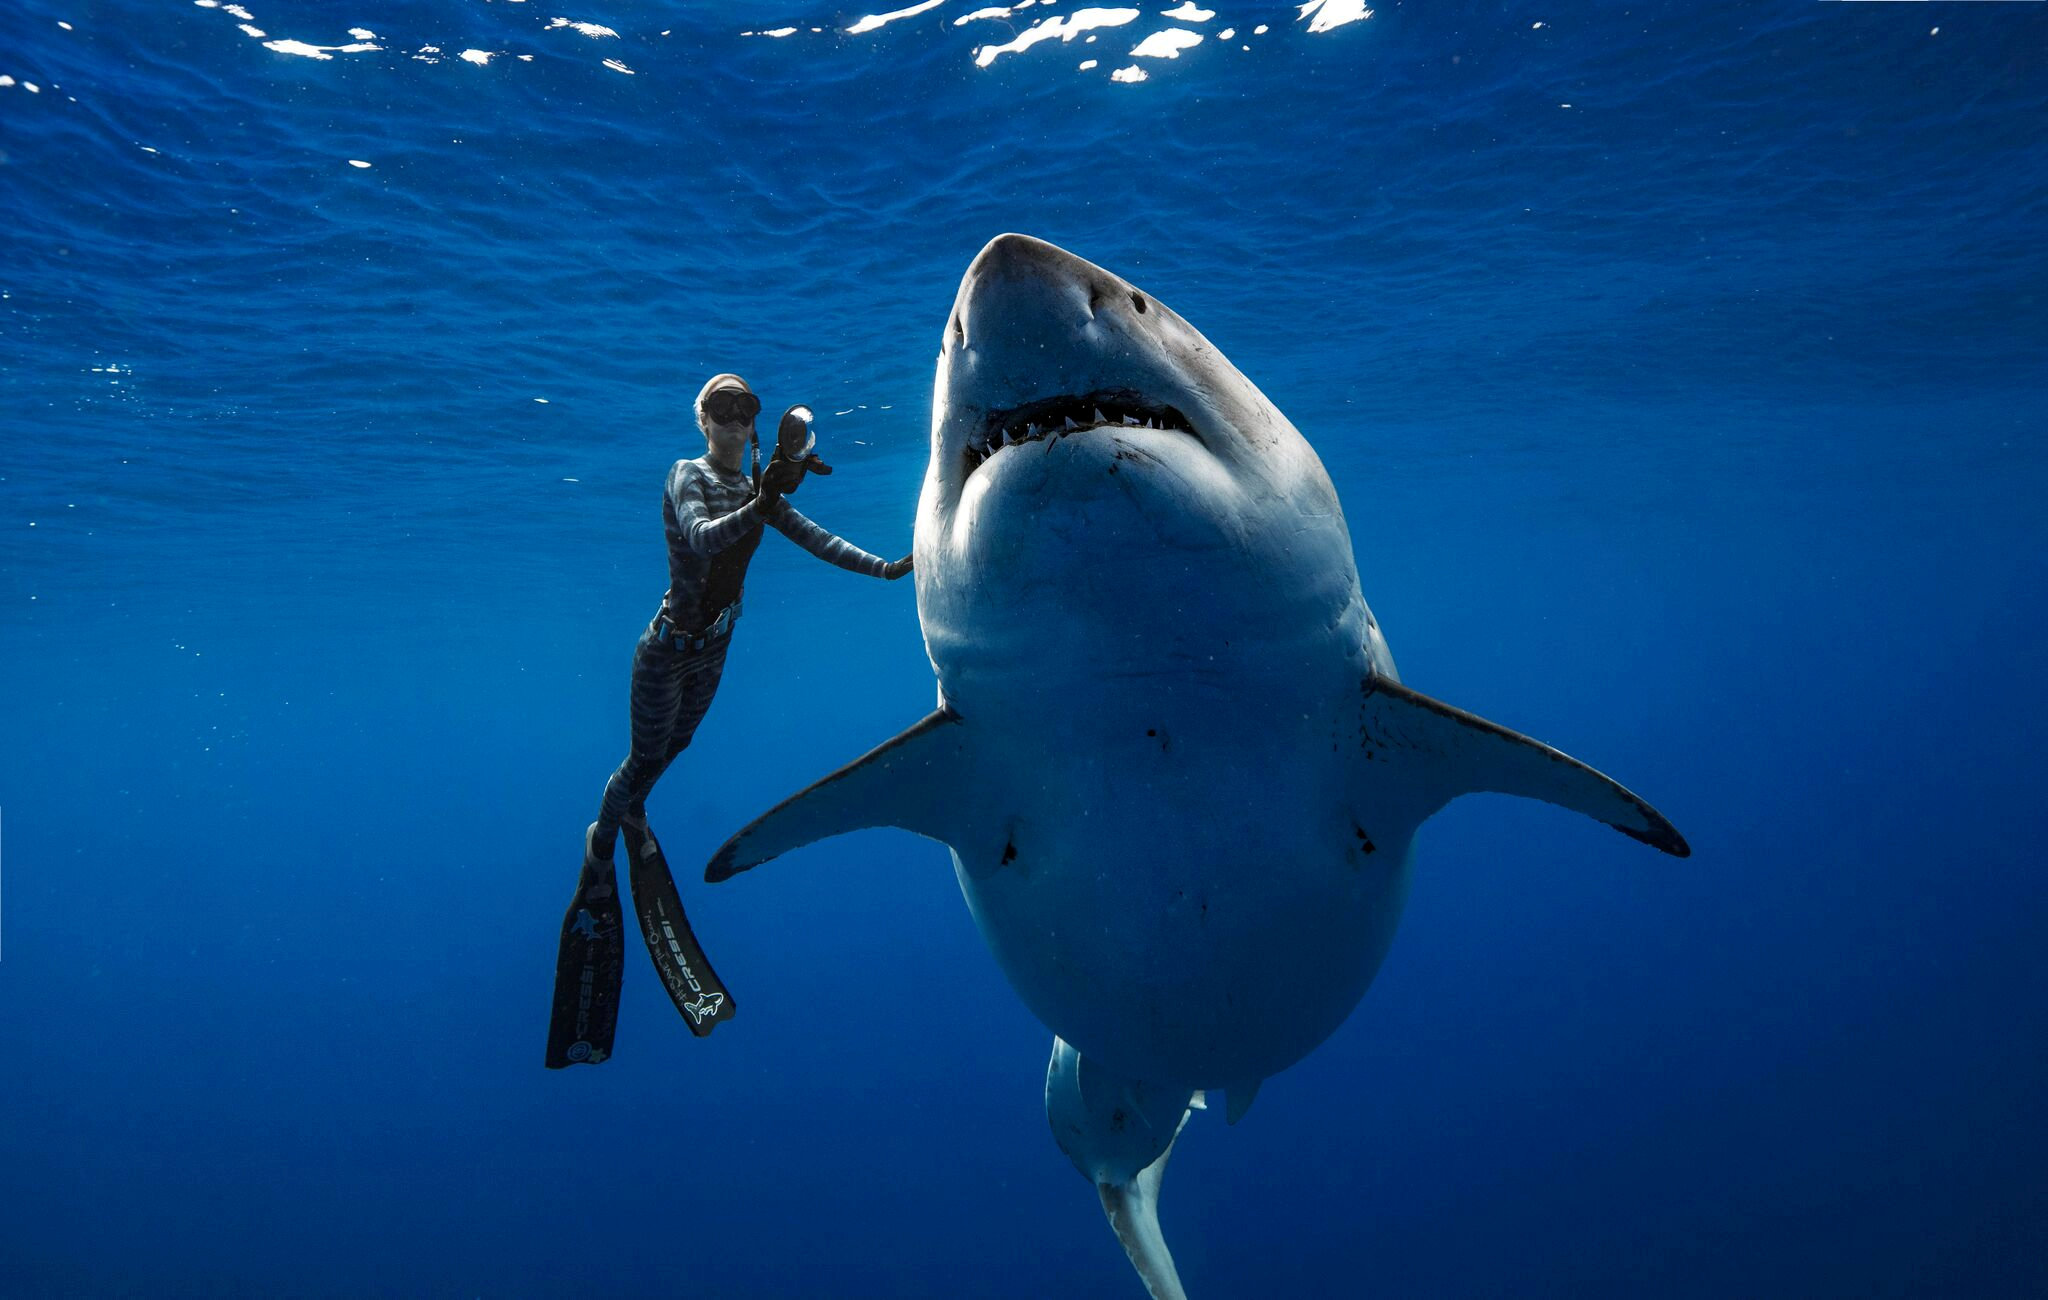 A shark said to be 'Deep Blue', one of the largest recorded individuals, swims offshore Hawaii, U.S., January 15, 2019 in this picture obtained from social media on January 17, 2019. @JuanSharks/@OceanRamsey/Juan Oliphant/oneoceandiving.com via REUTERS  ATTENTION EDITORS - THIS IMAGE HAS BEEN SUPPLIED BY A THIRD PARTY. MANDATORY CREDIT. NO RESALES. NO ARCHIVES